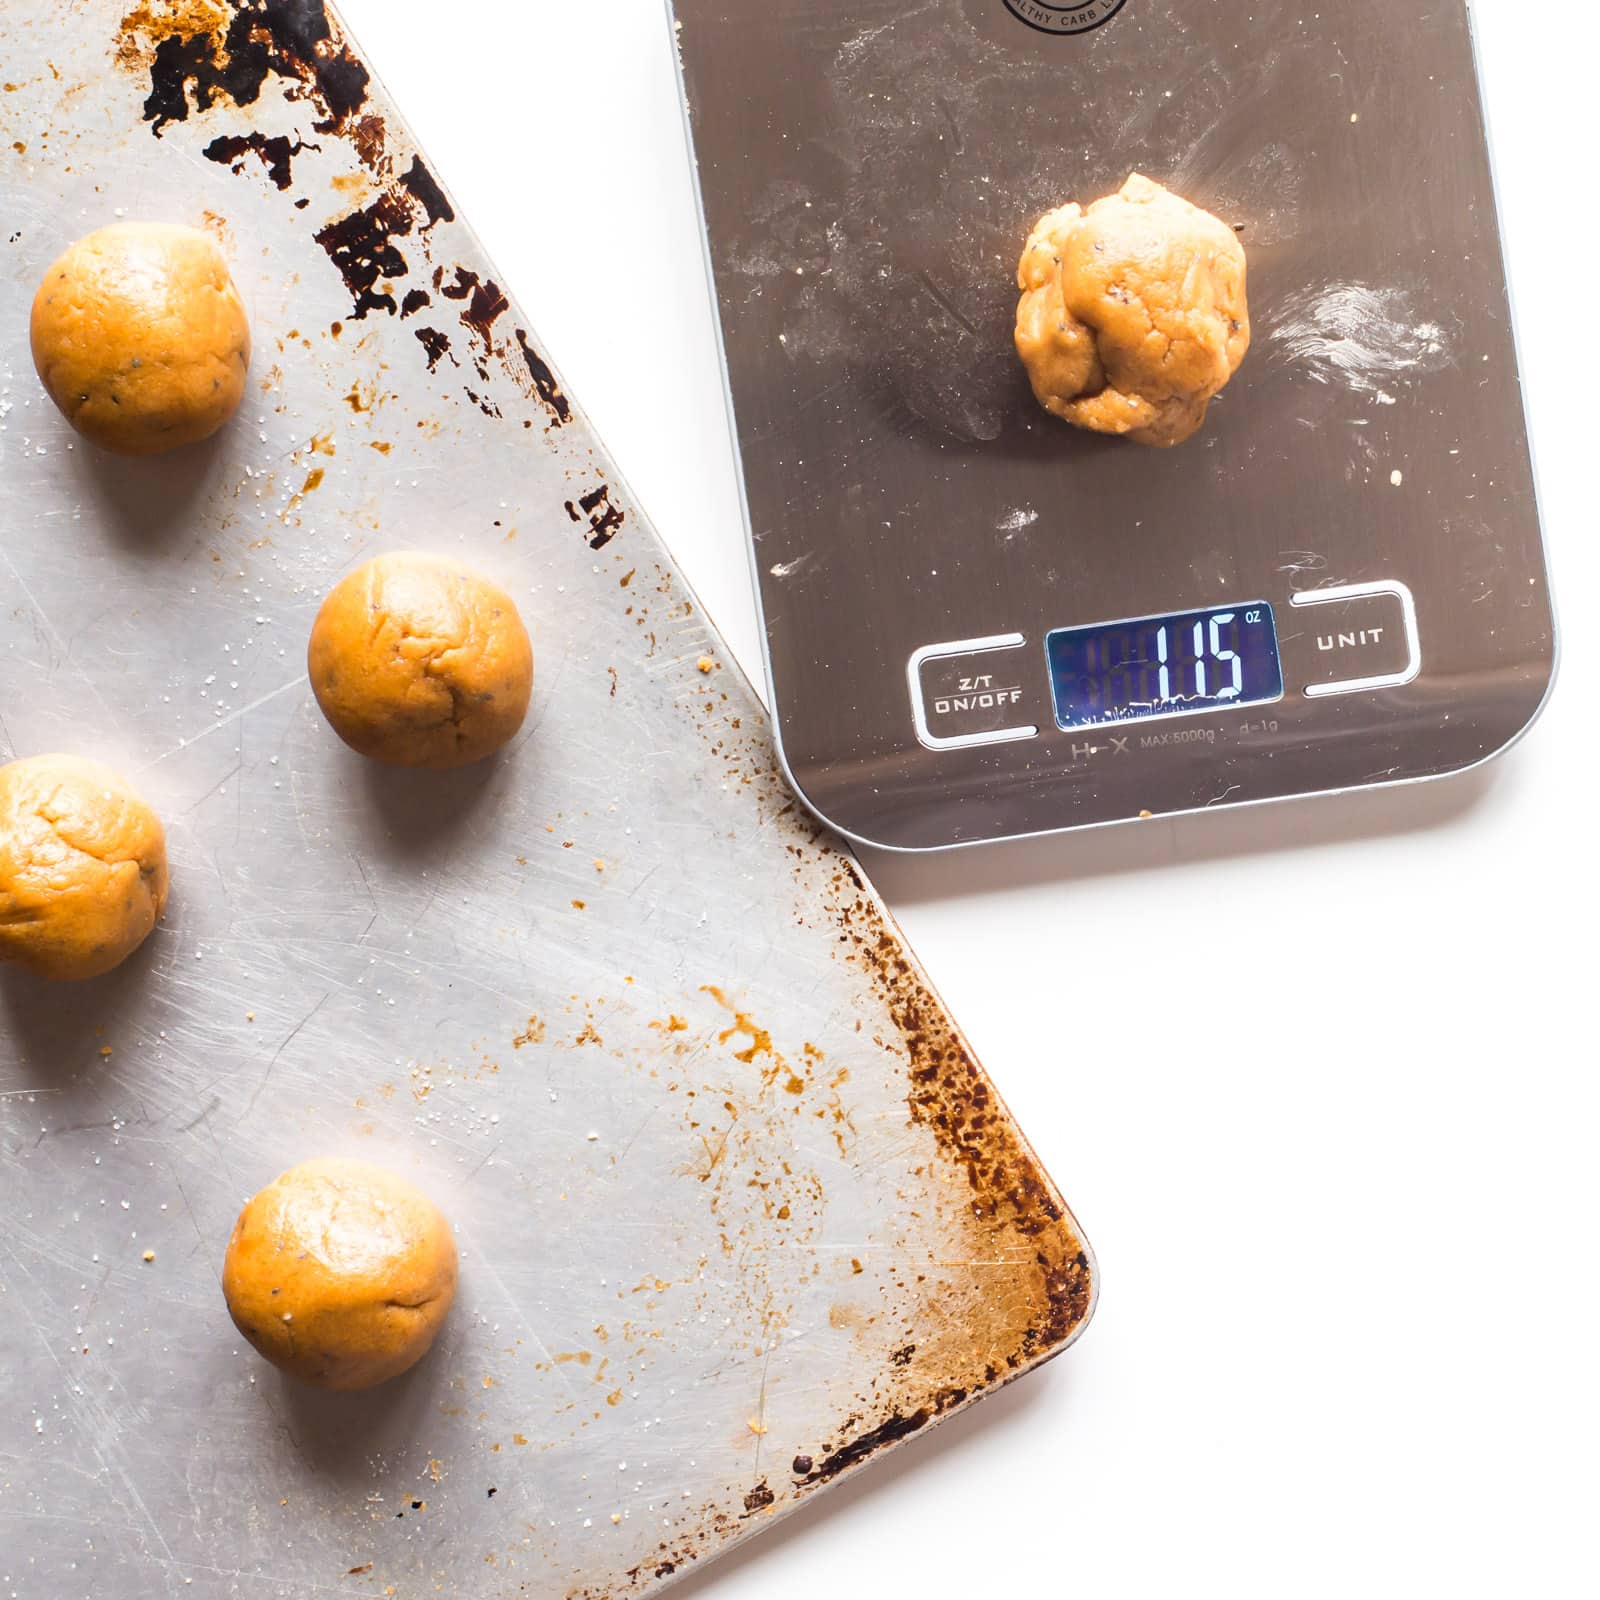 The cookie dough for these vegan peanut butter balls sit on a baking pan. A pinch of the dough is sitting on a kitchen measuring tool to help weight cookies to make them equally sized.